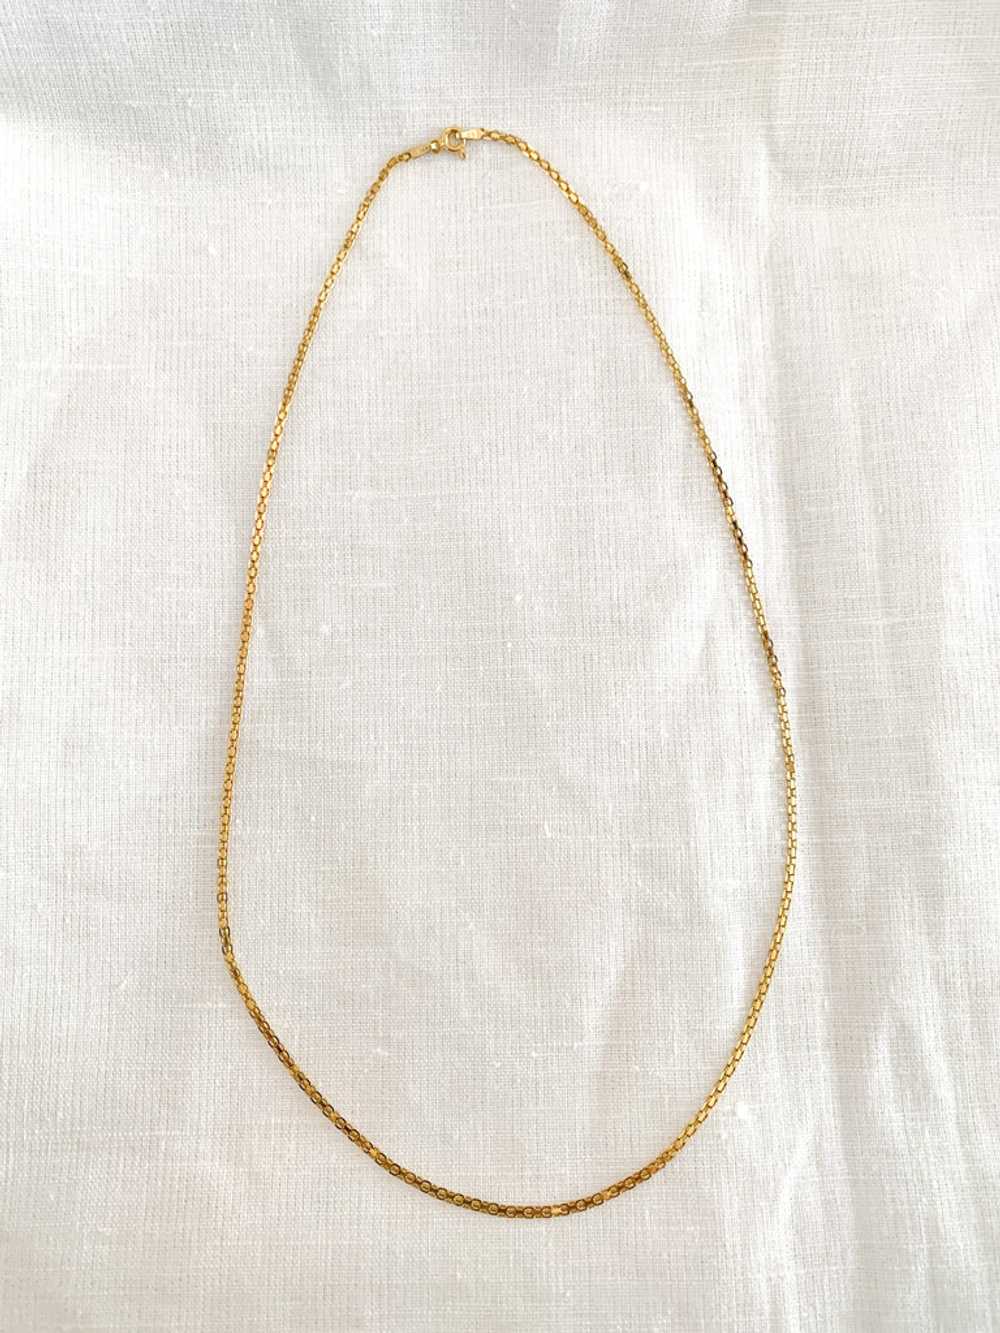 14K Box Chain Necklace - image 4